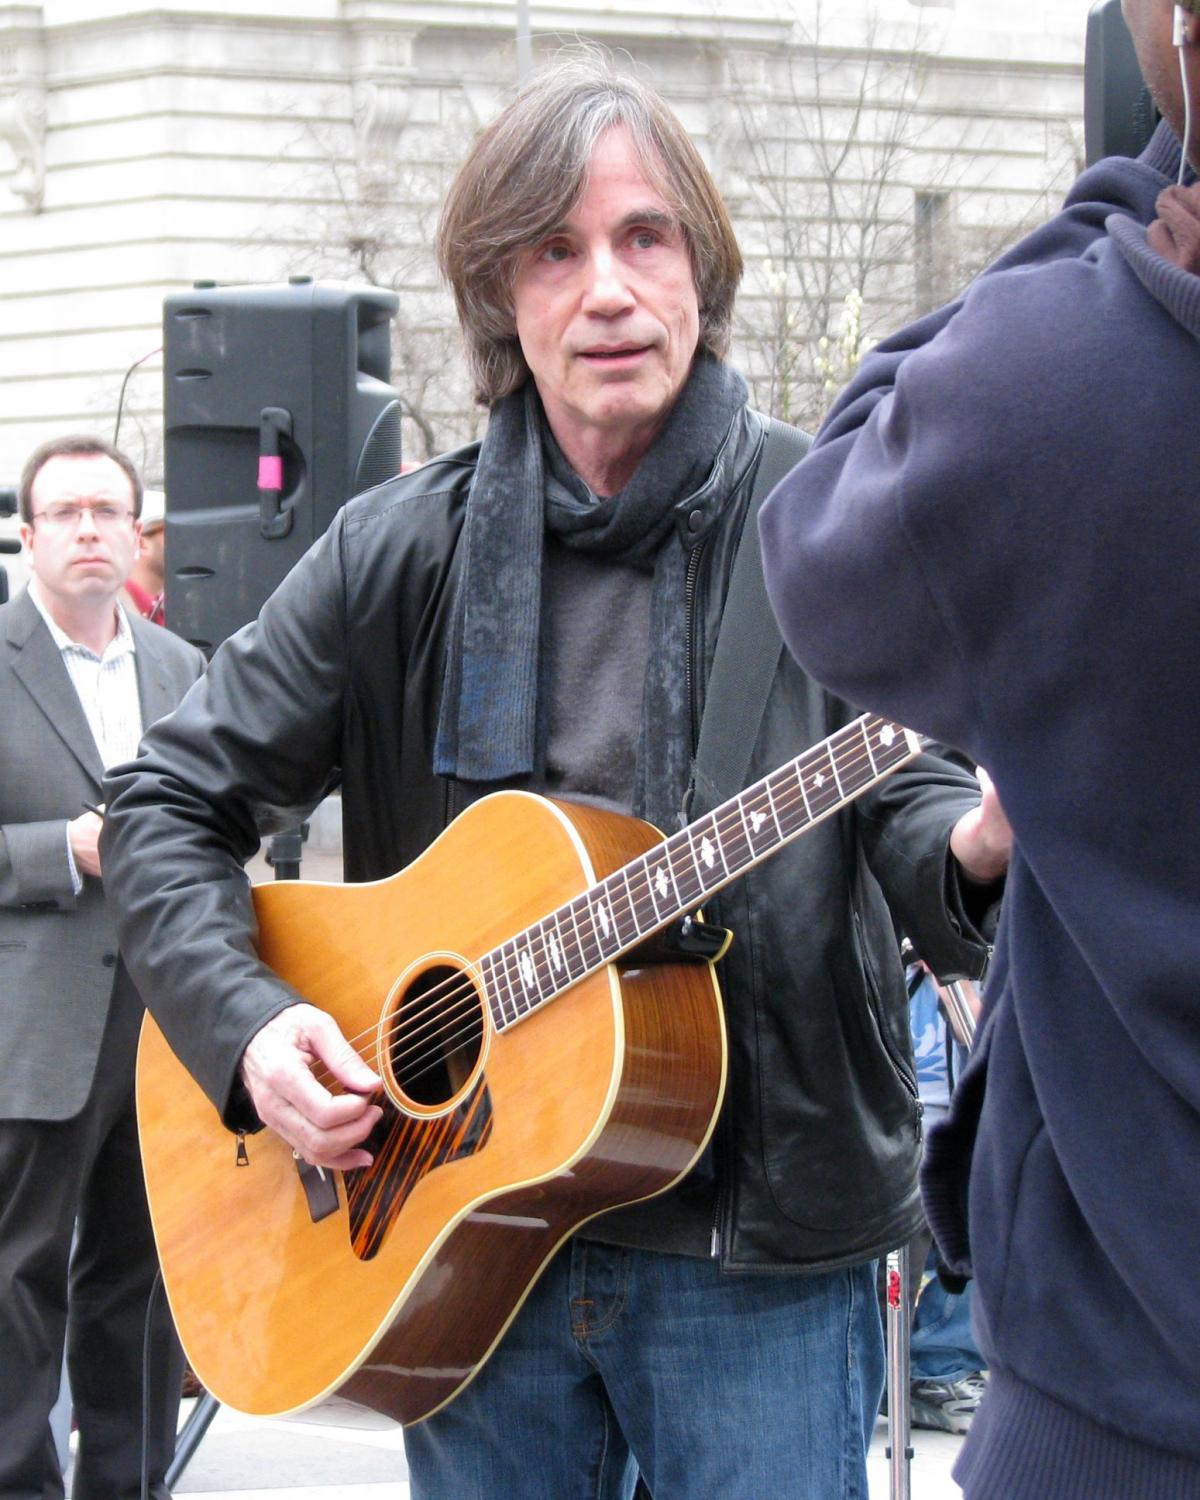 Color photo of a man in a leather jacket playing the guitar.